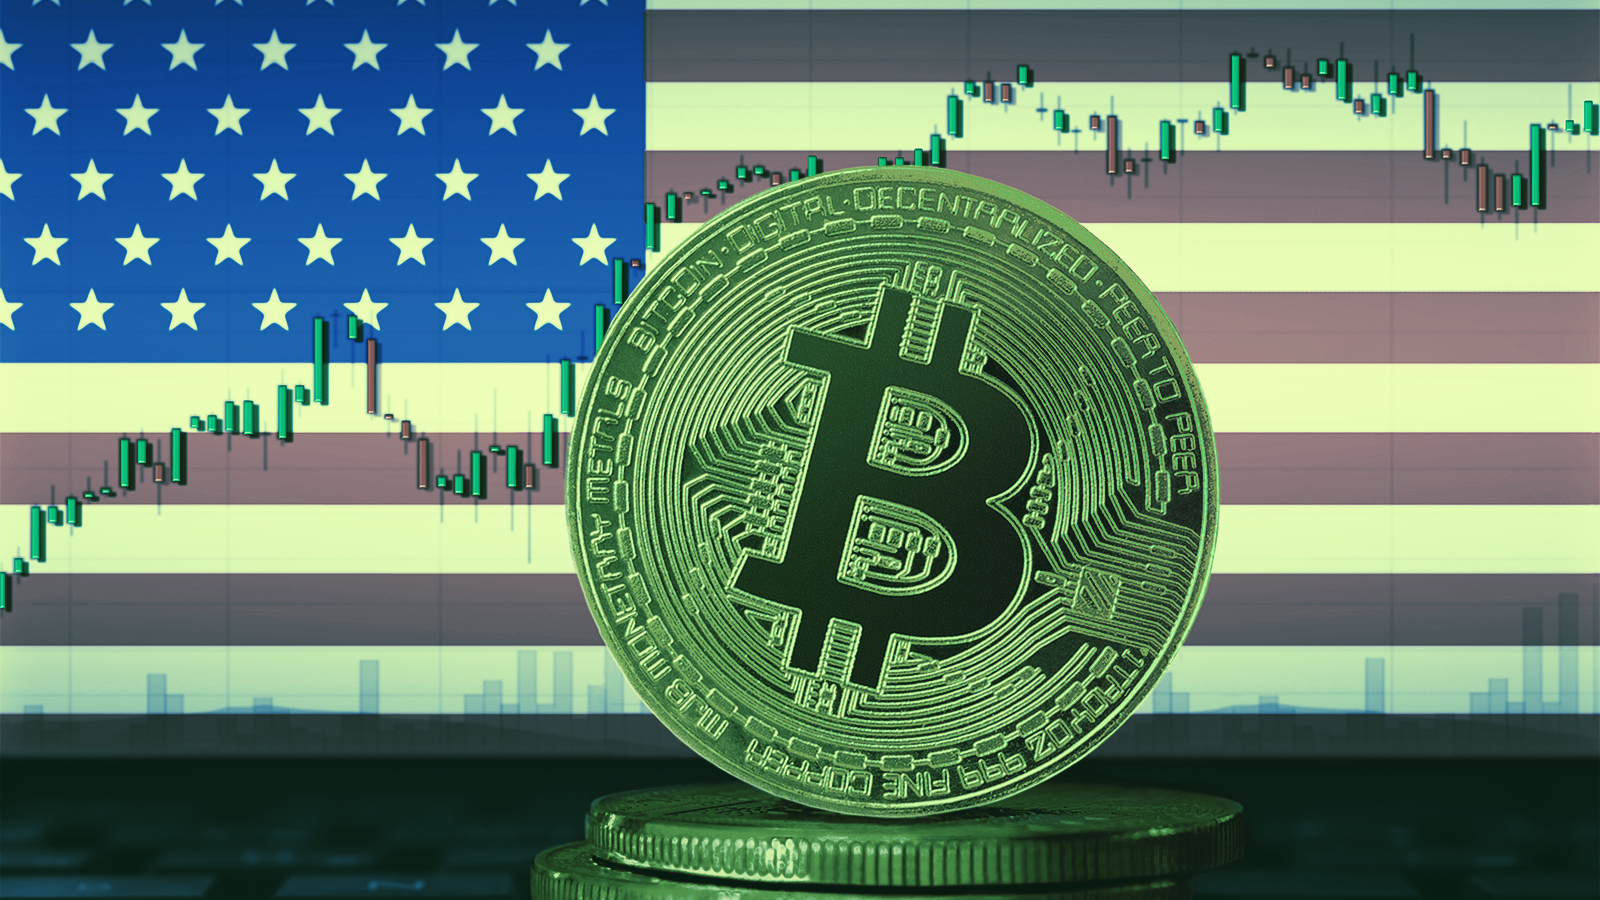 Bitcoin and the USA. Image: Shutterstock